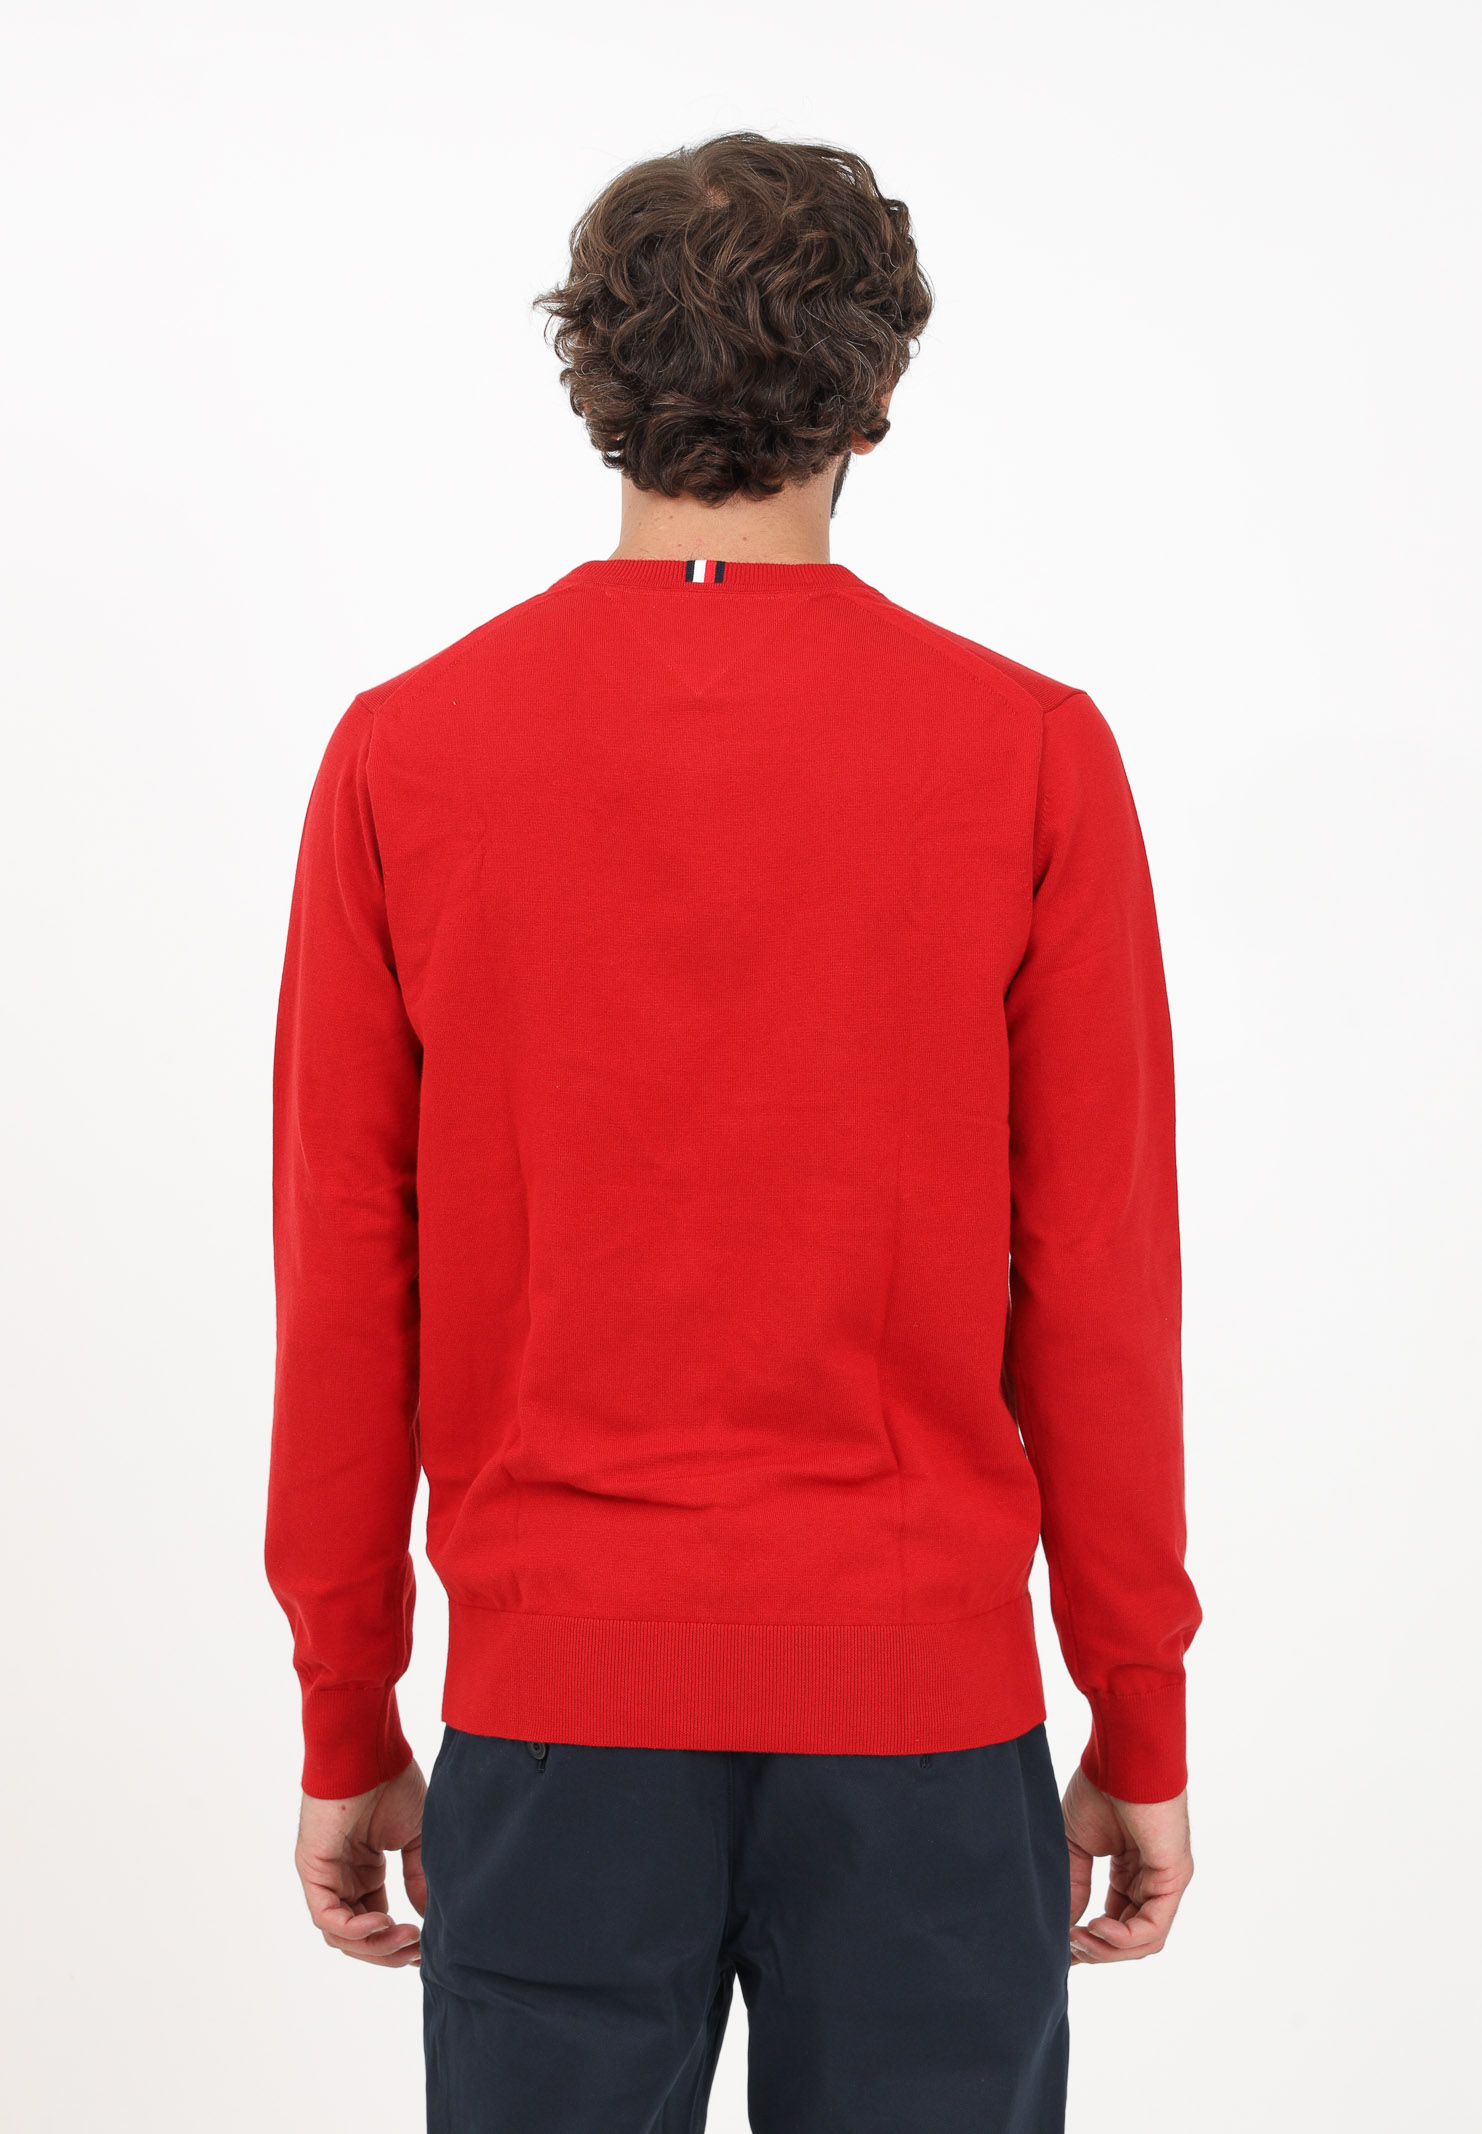 men HILFIGER - - Red crew-neck embroidery logo with for Pavidas sweater TOMMY